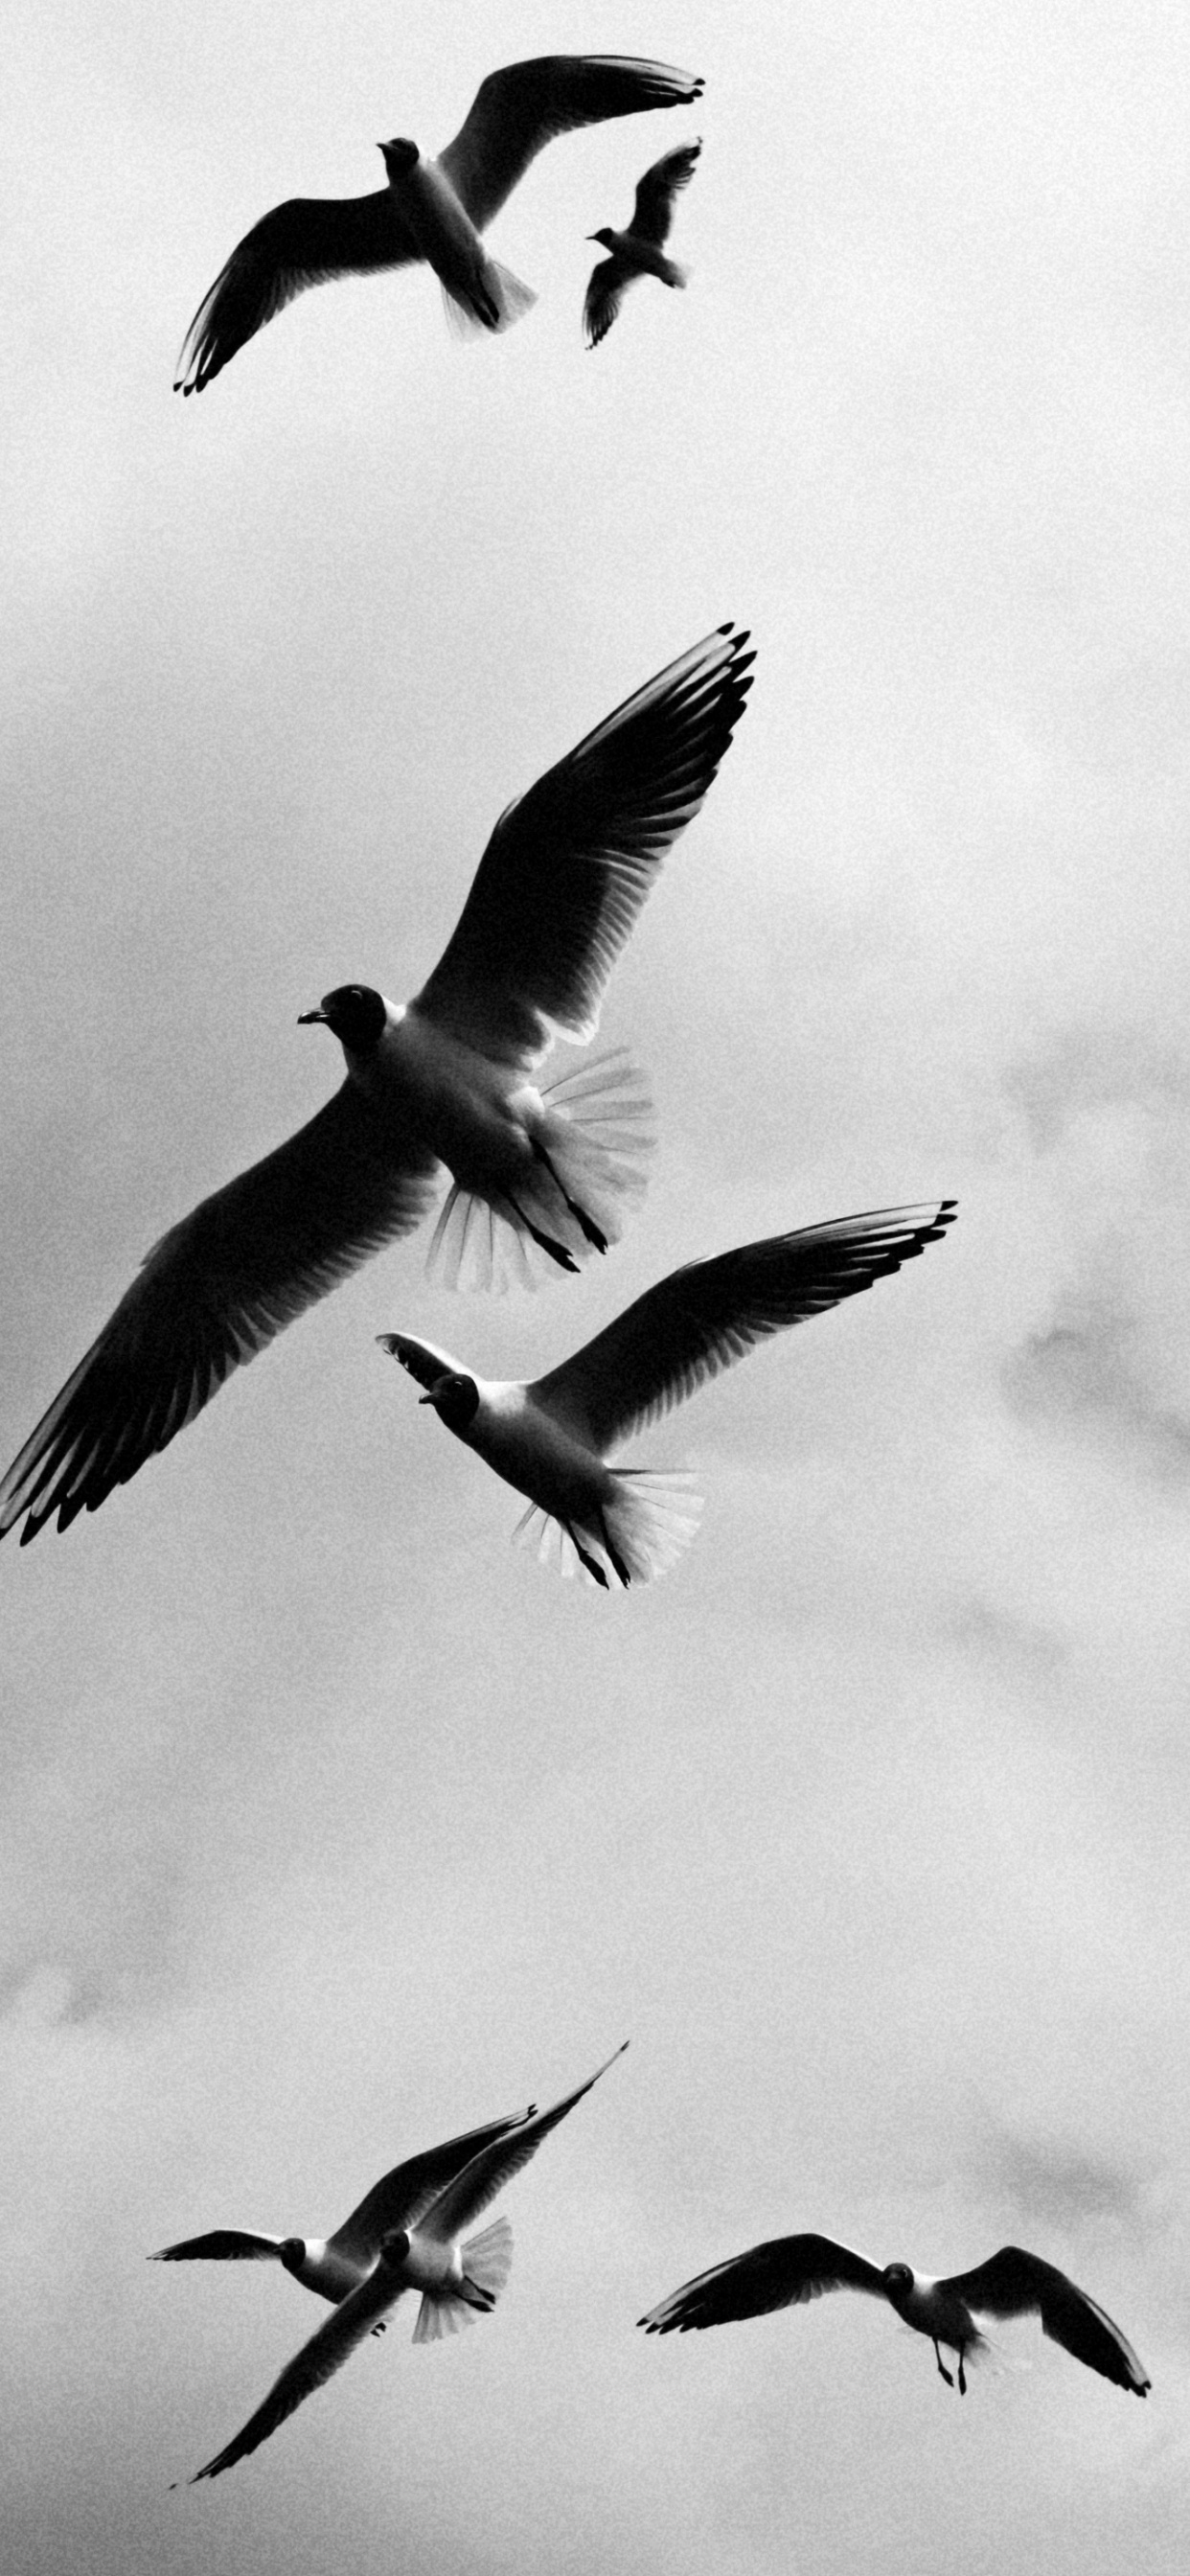 Grayscale Photography of Birds Flying. Wallpaper in 1242x2688 Resolution